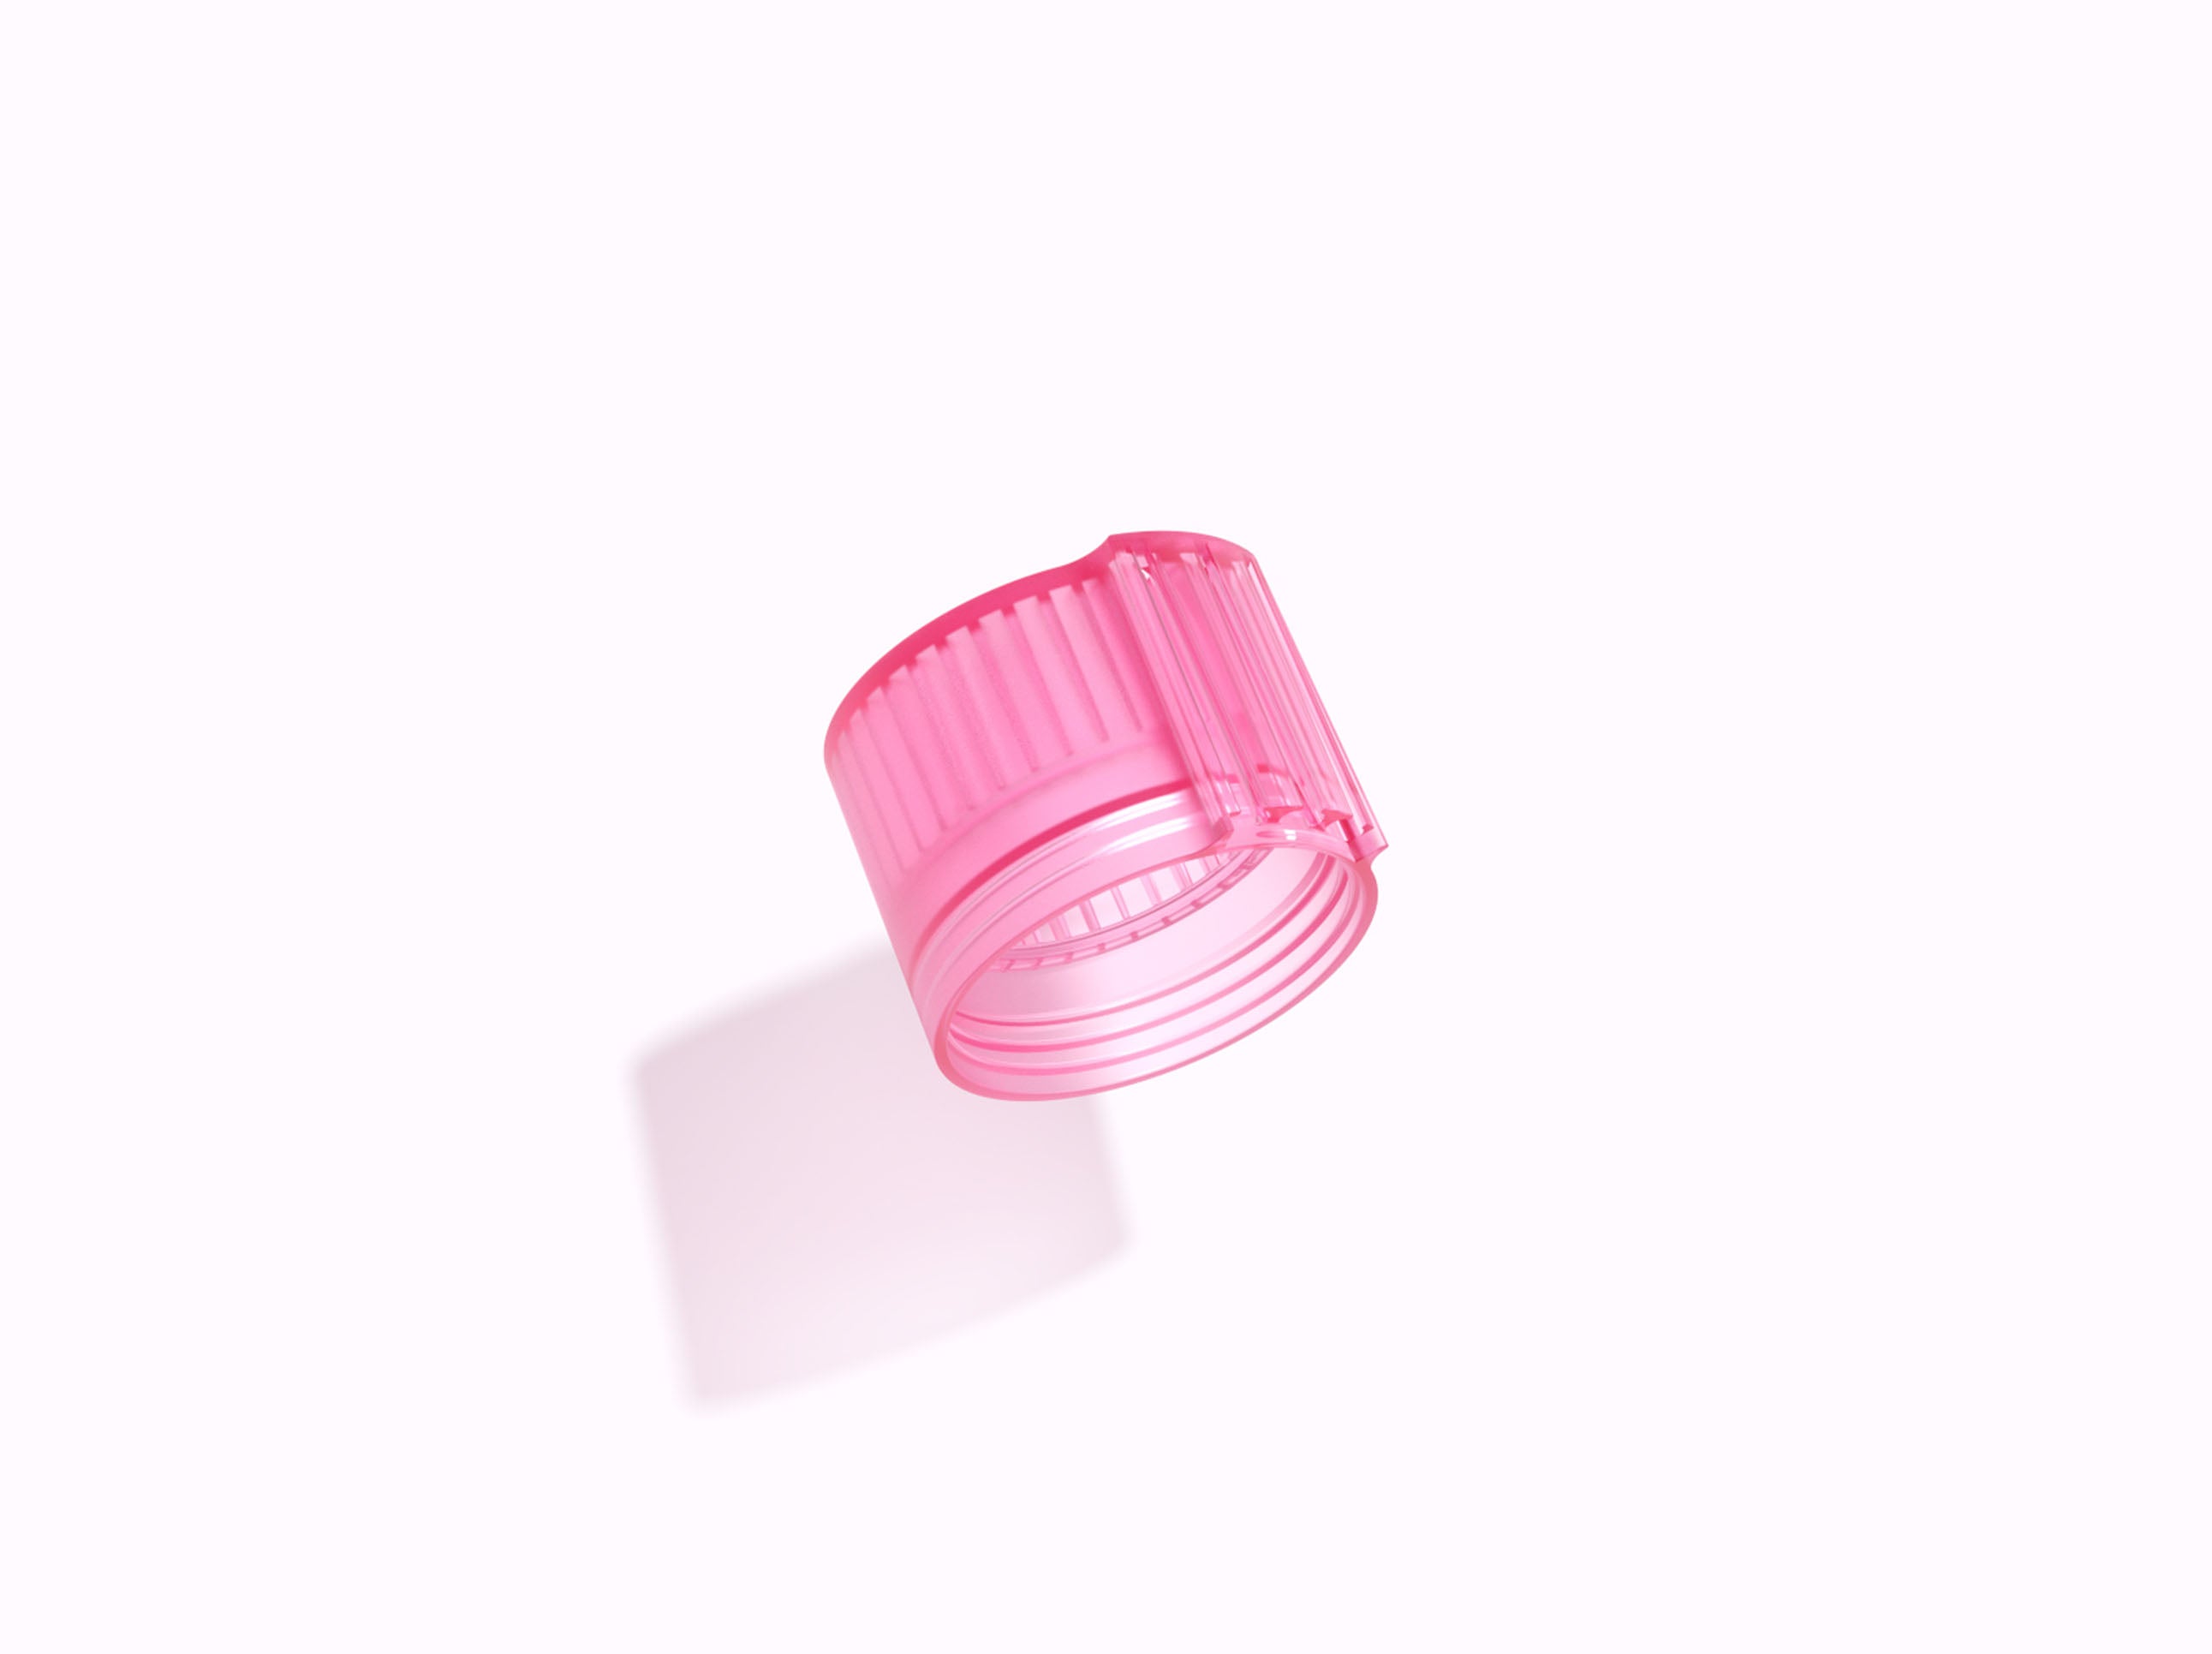 https://cdn.shopify.com/s/files/1/0580/3389/7621/products/AirUP-SparePart-HotPink_Lid.jpg?v=1674581795